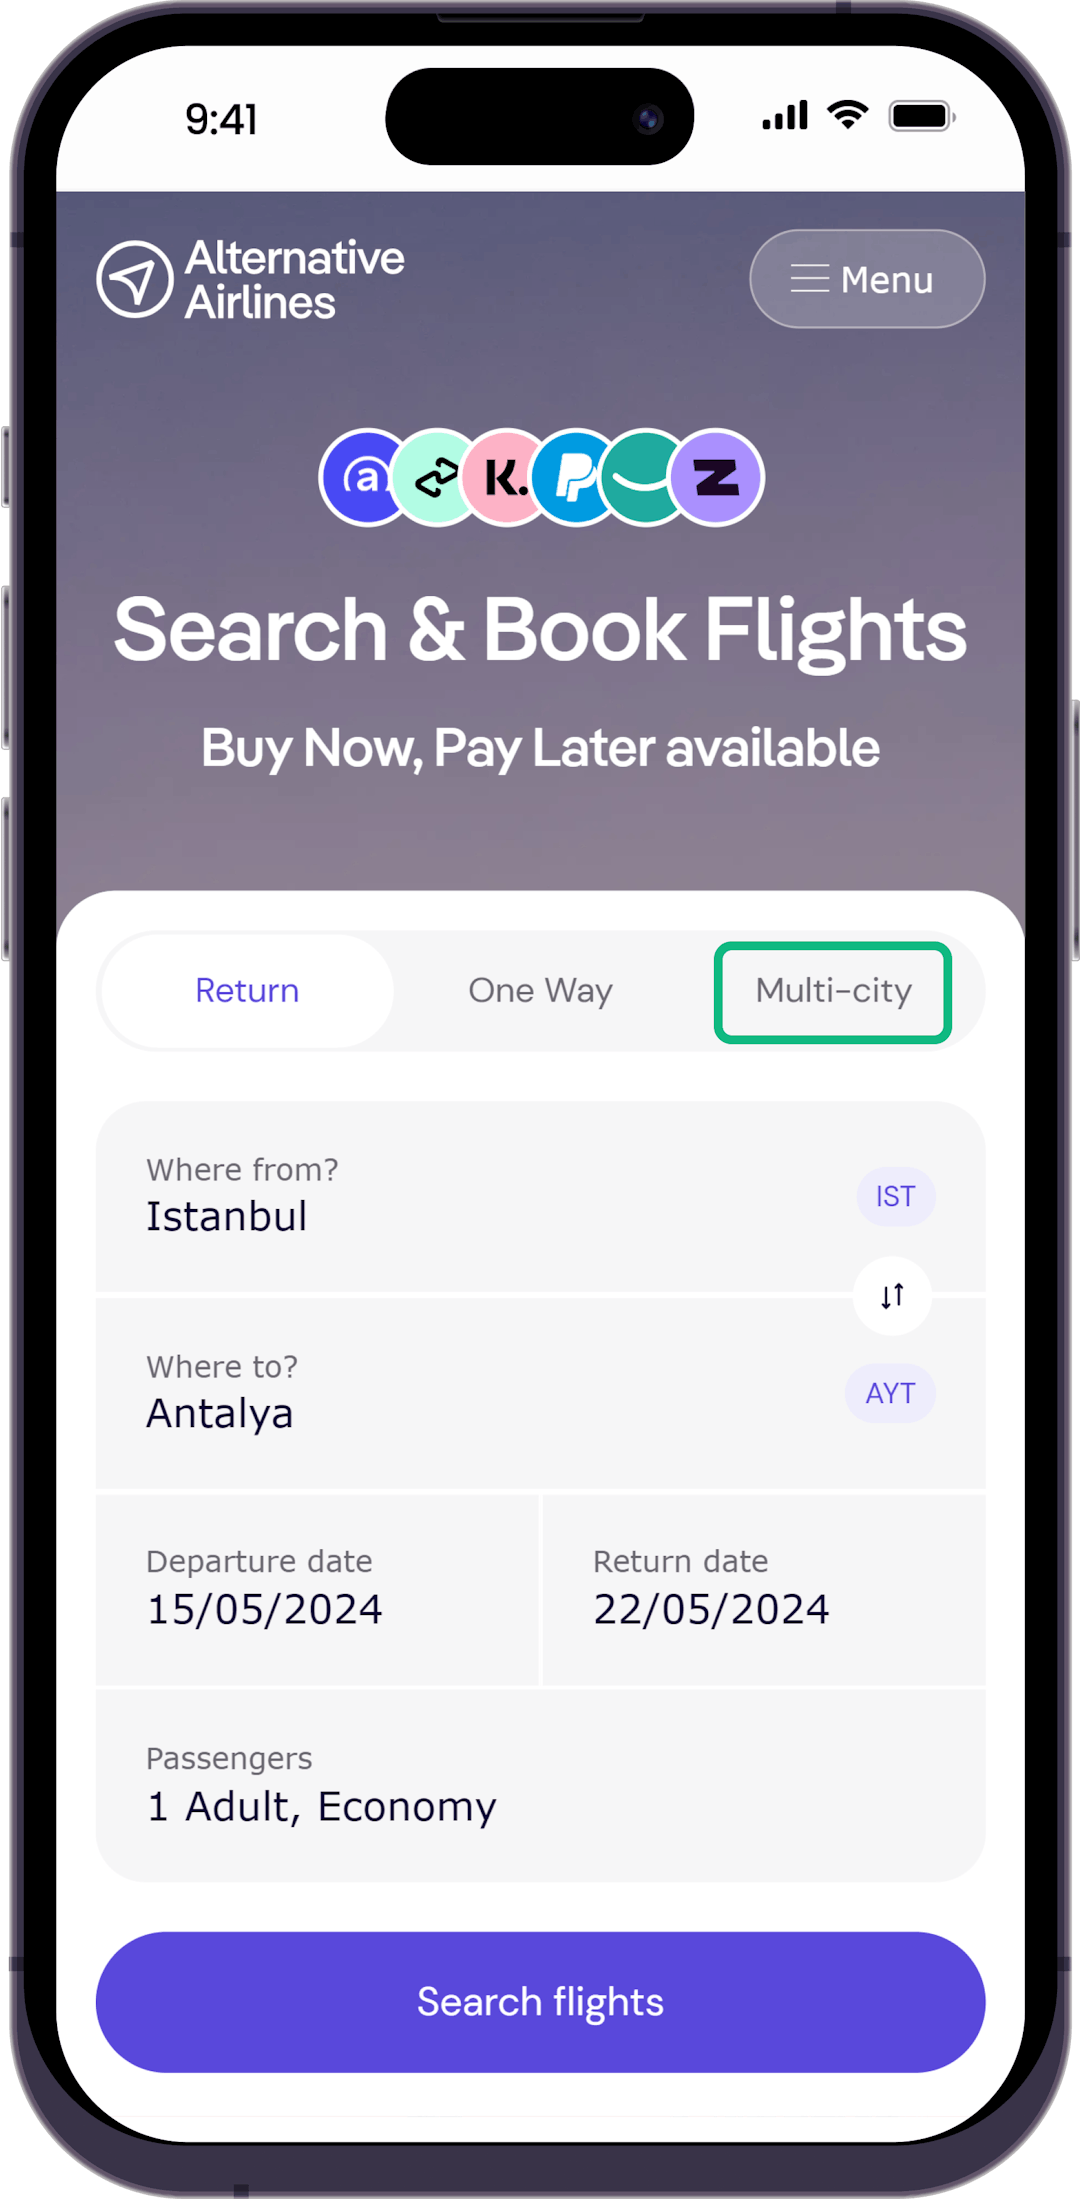 Step 1 - Select multi-city option on search form